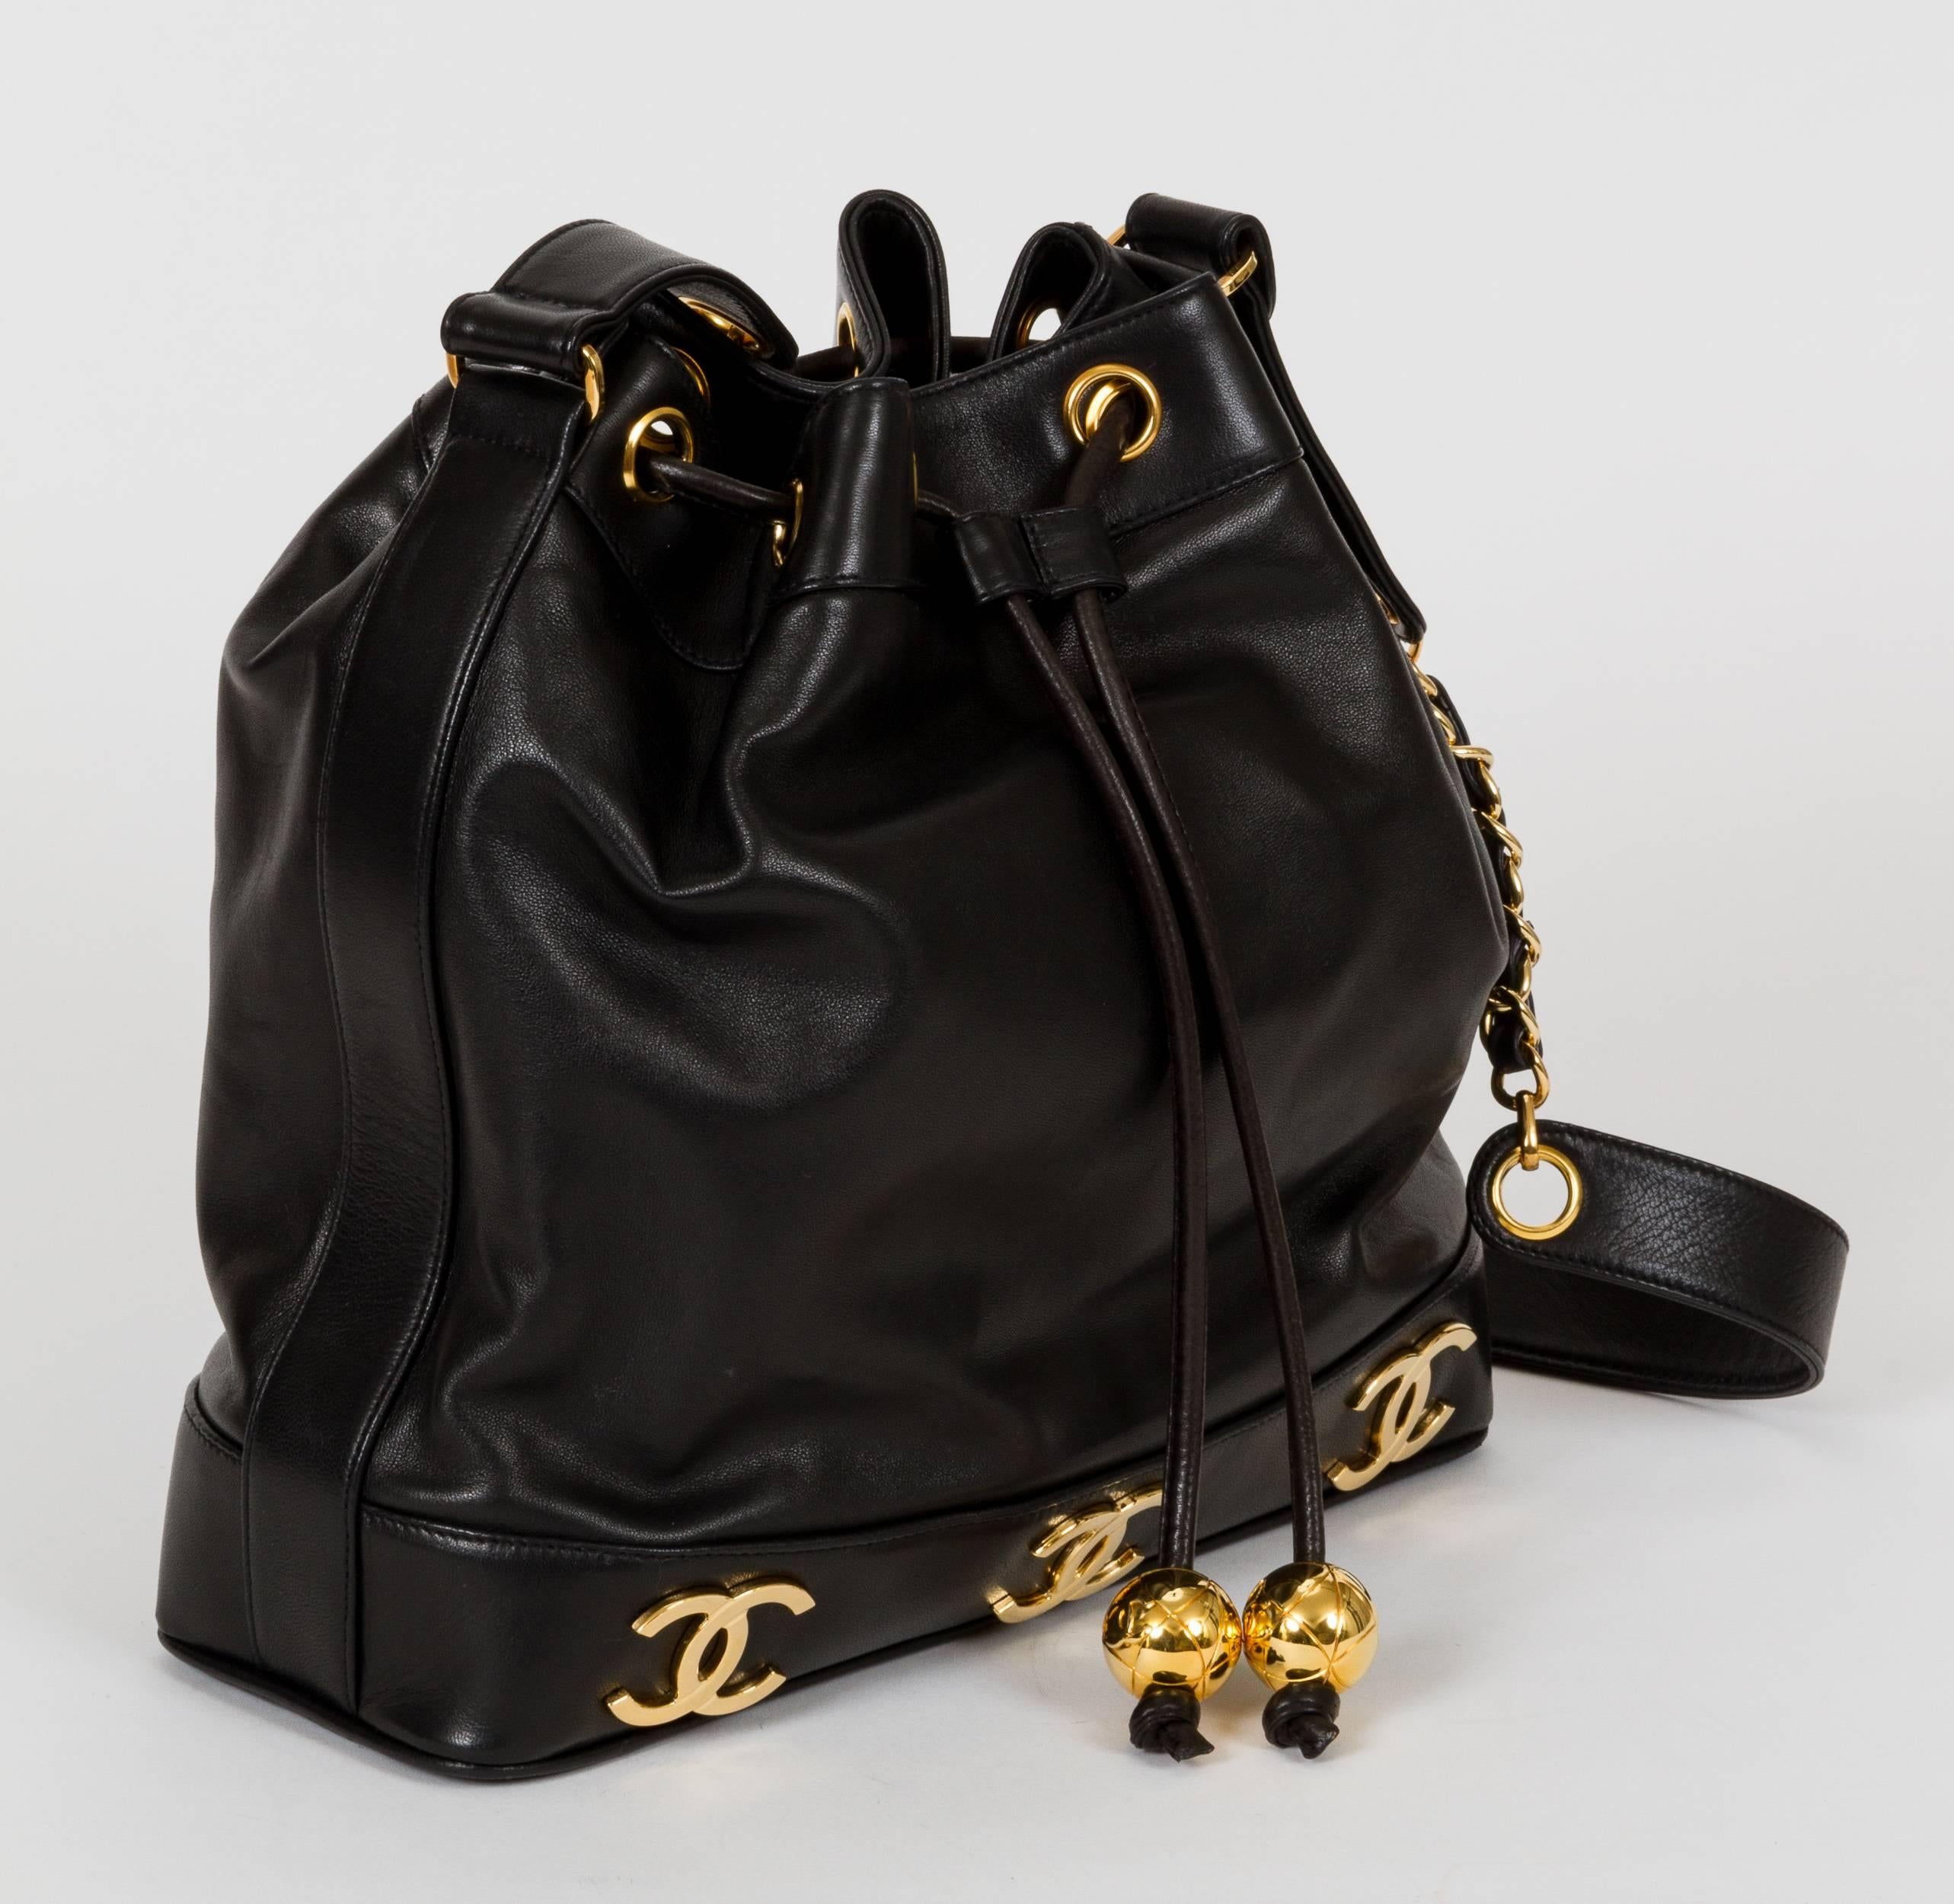 1990s Chanel black lambskin drawstring bucket bag with goldtone logo accents. Attached interior pouch. Shoulder strap, 19